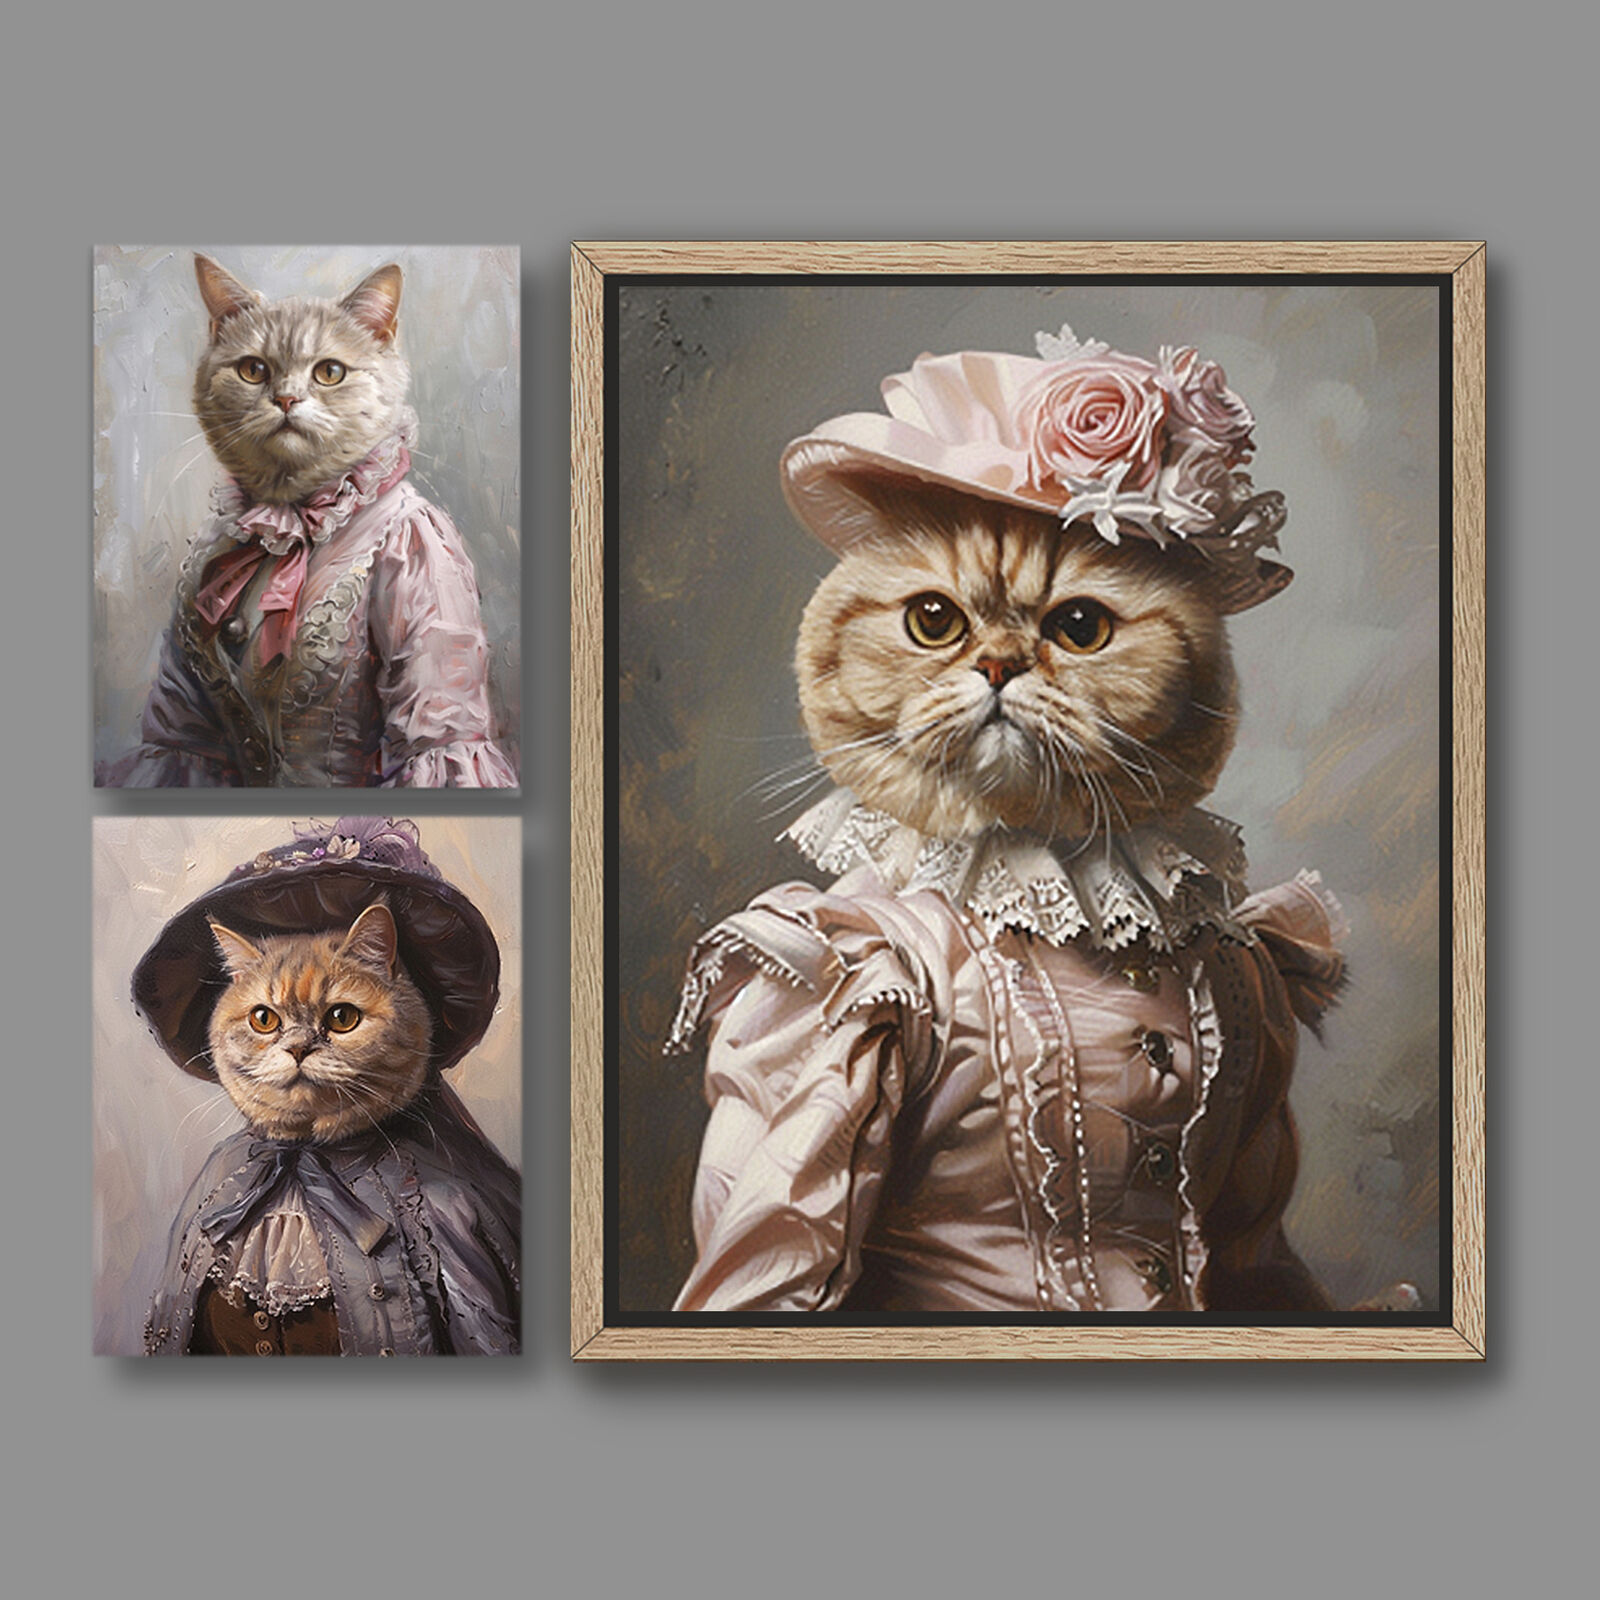 1 Custom British Shorthair Cat Portrait or Pick Any 3 As-Is, Royal Pets A008C